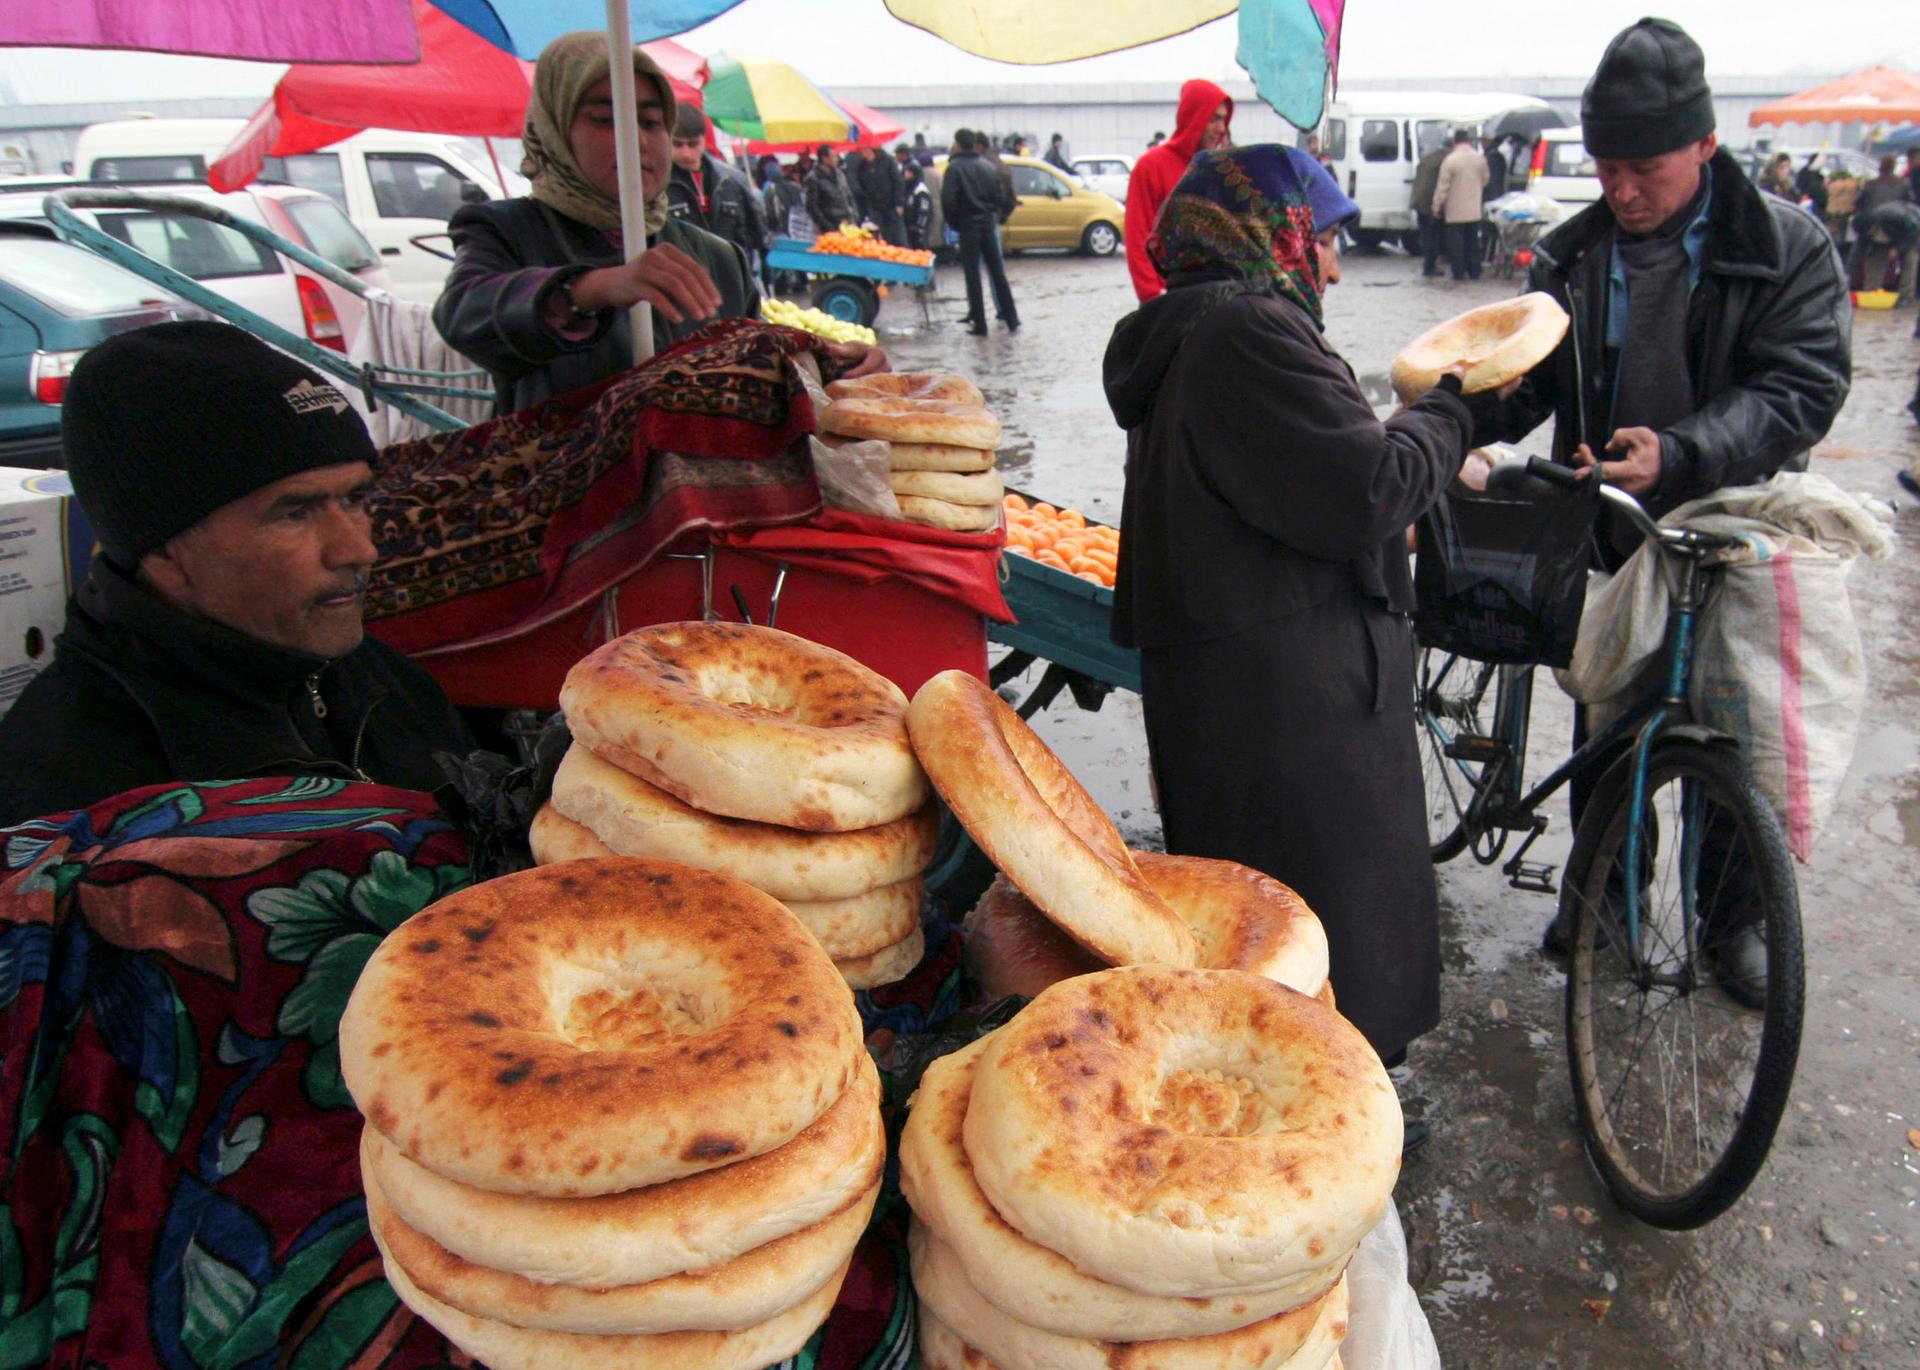 A man sells flat cakes in Dushanbe February 23, 2009.